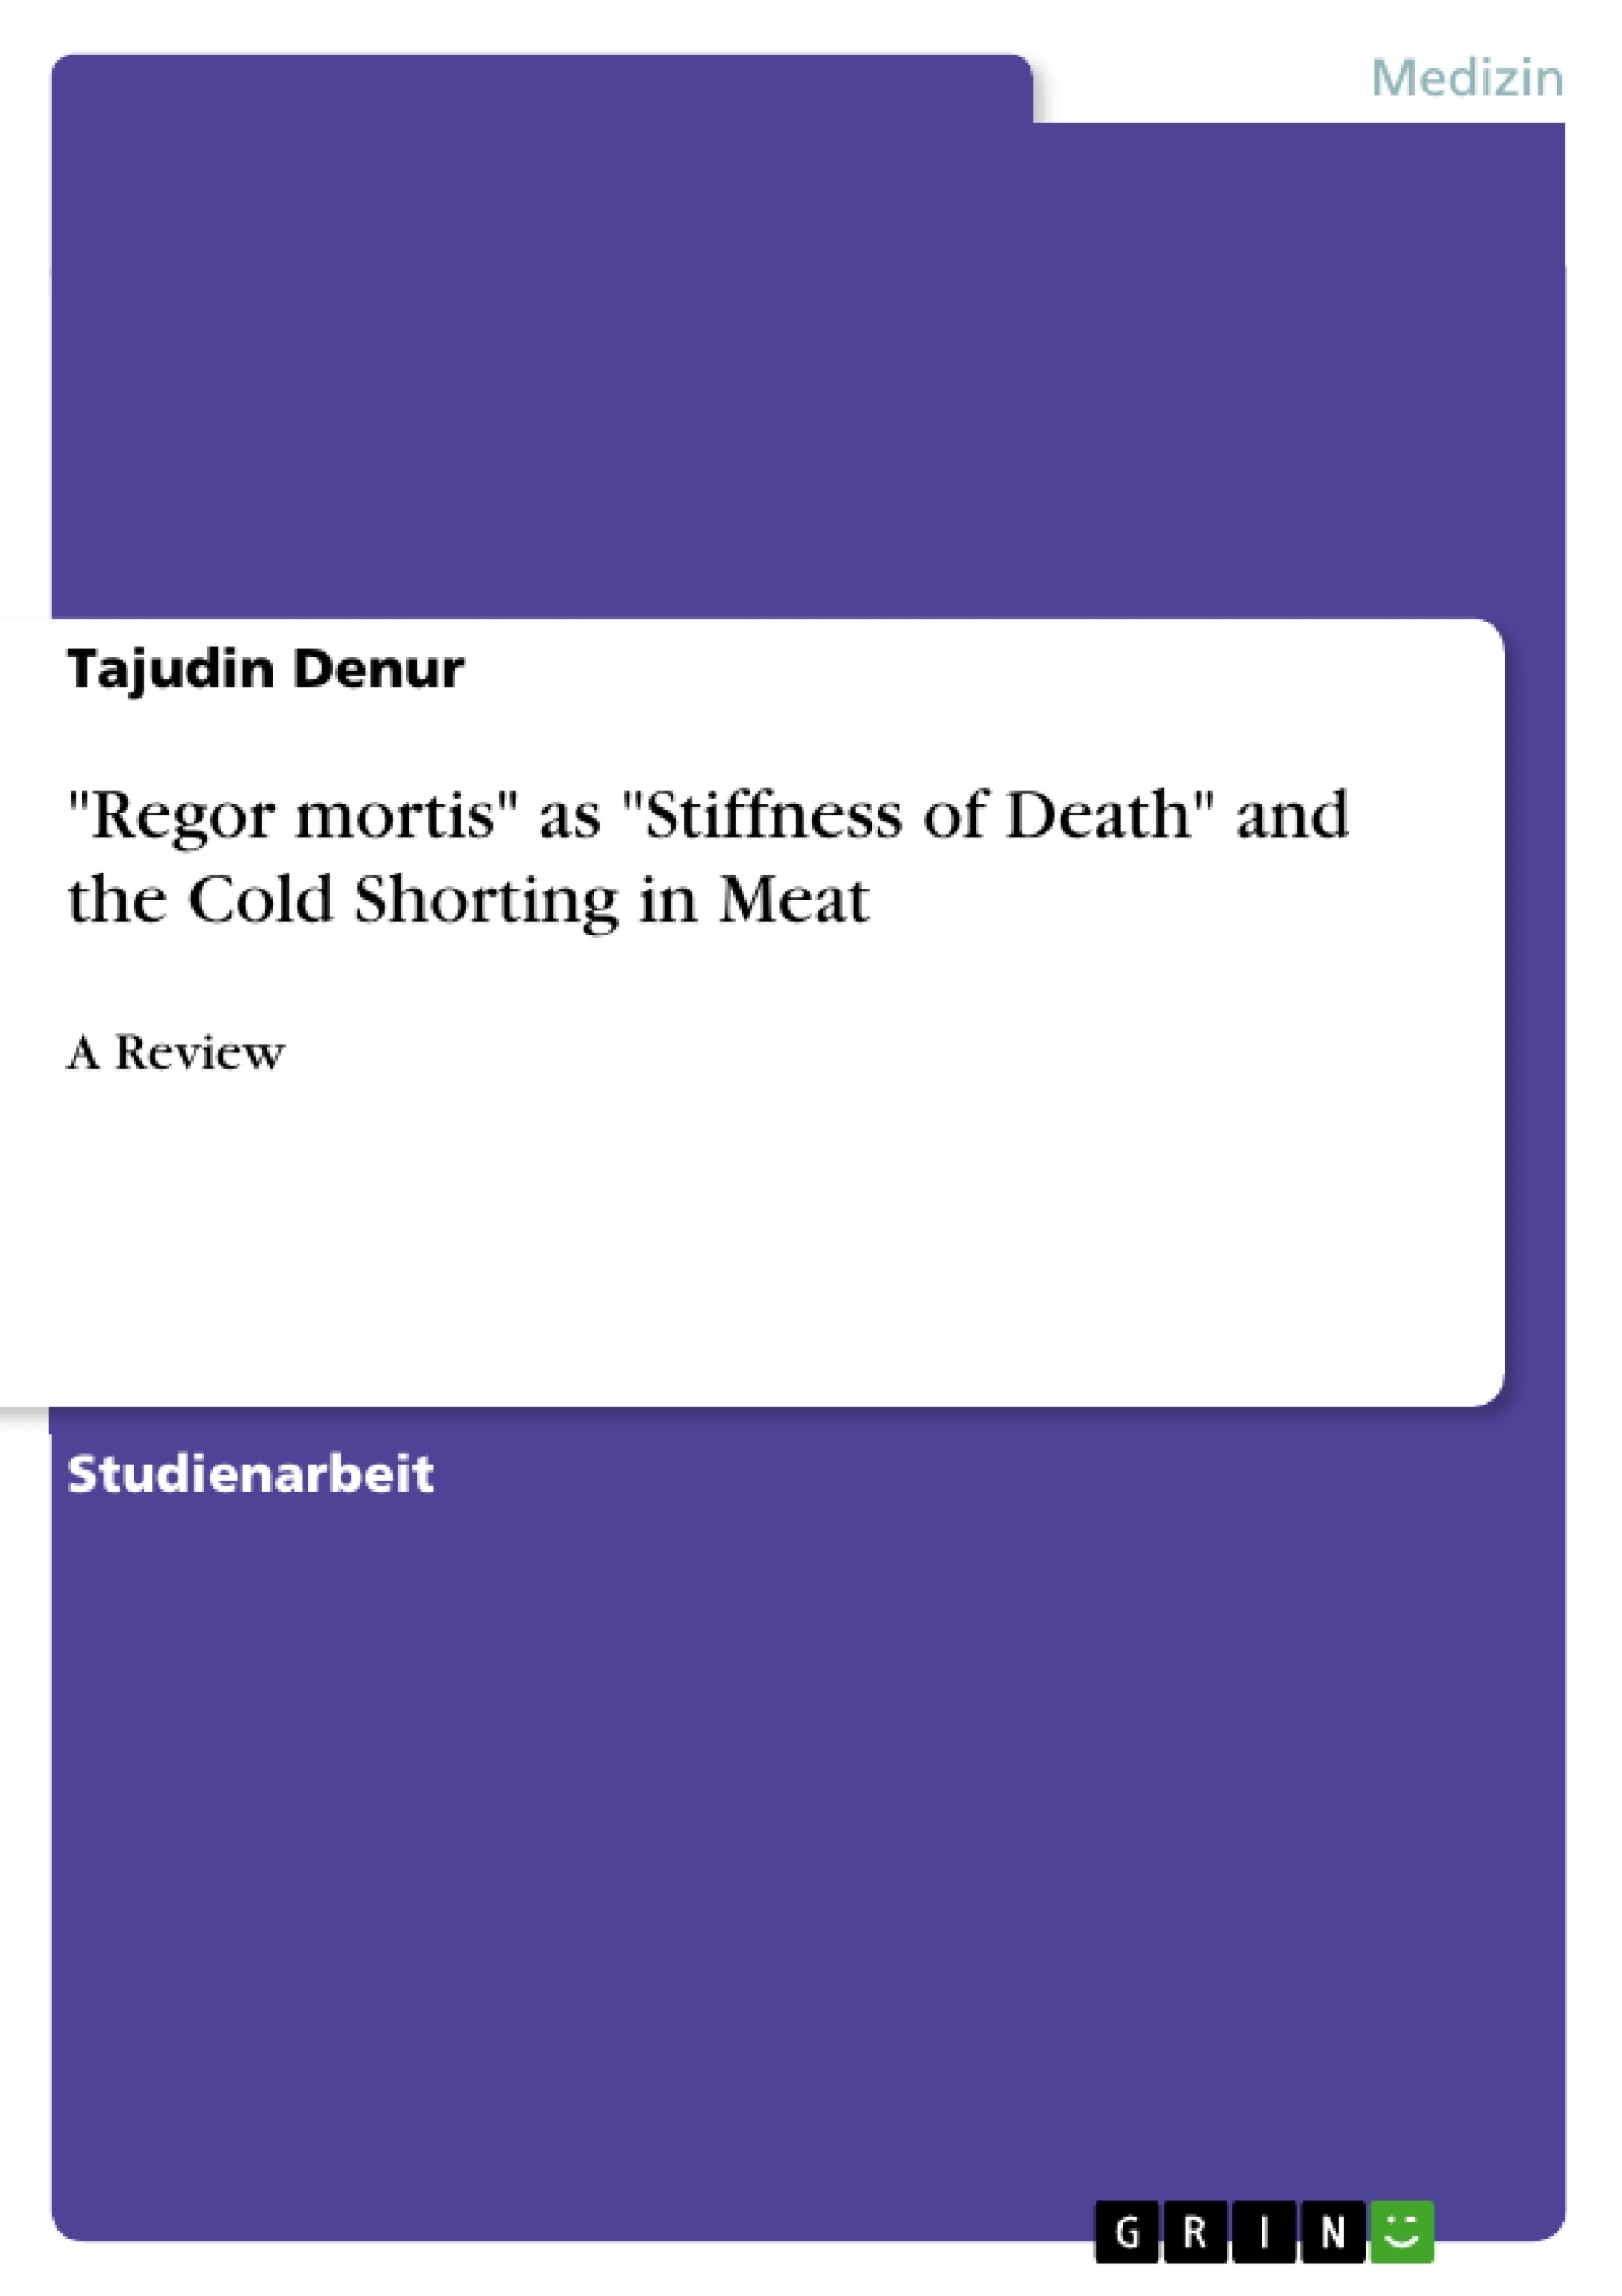 Titel: "Regor mortis" as "Stiffness of Death" and the Cold Shorting in Meat